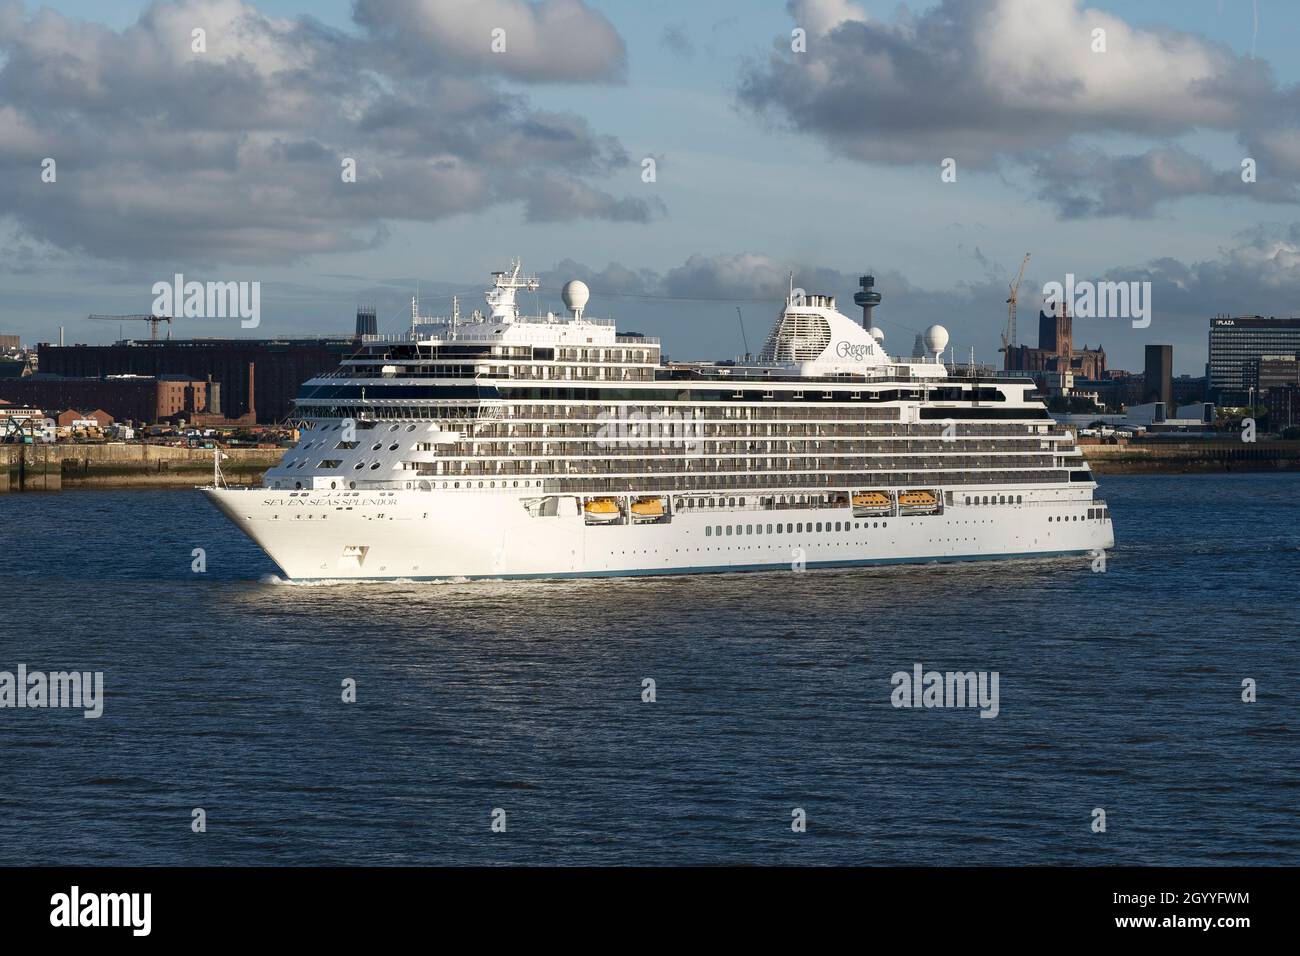 The Regent Seven Seas cruise ship Seven Seas Splendor leaves Liverpool with the city skyline in the background Stock Photo